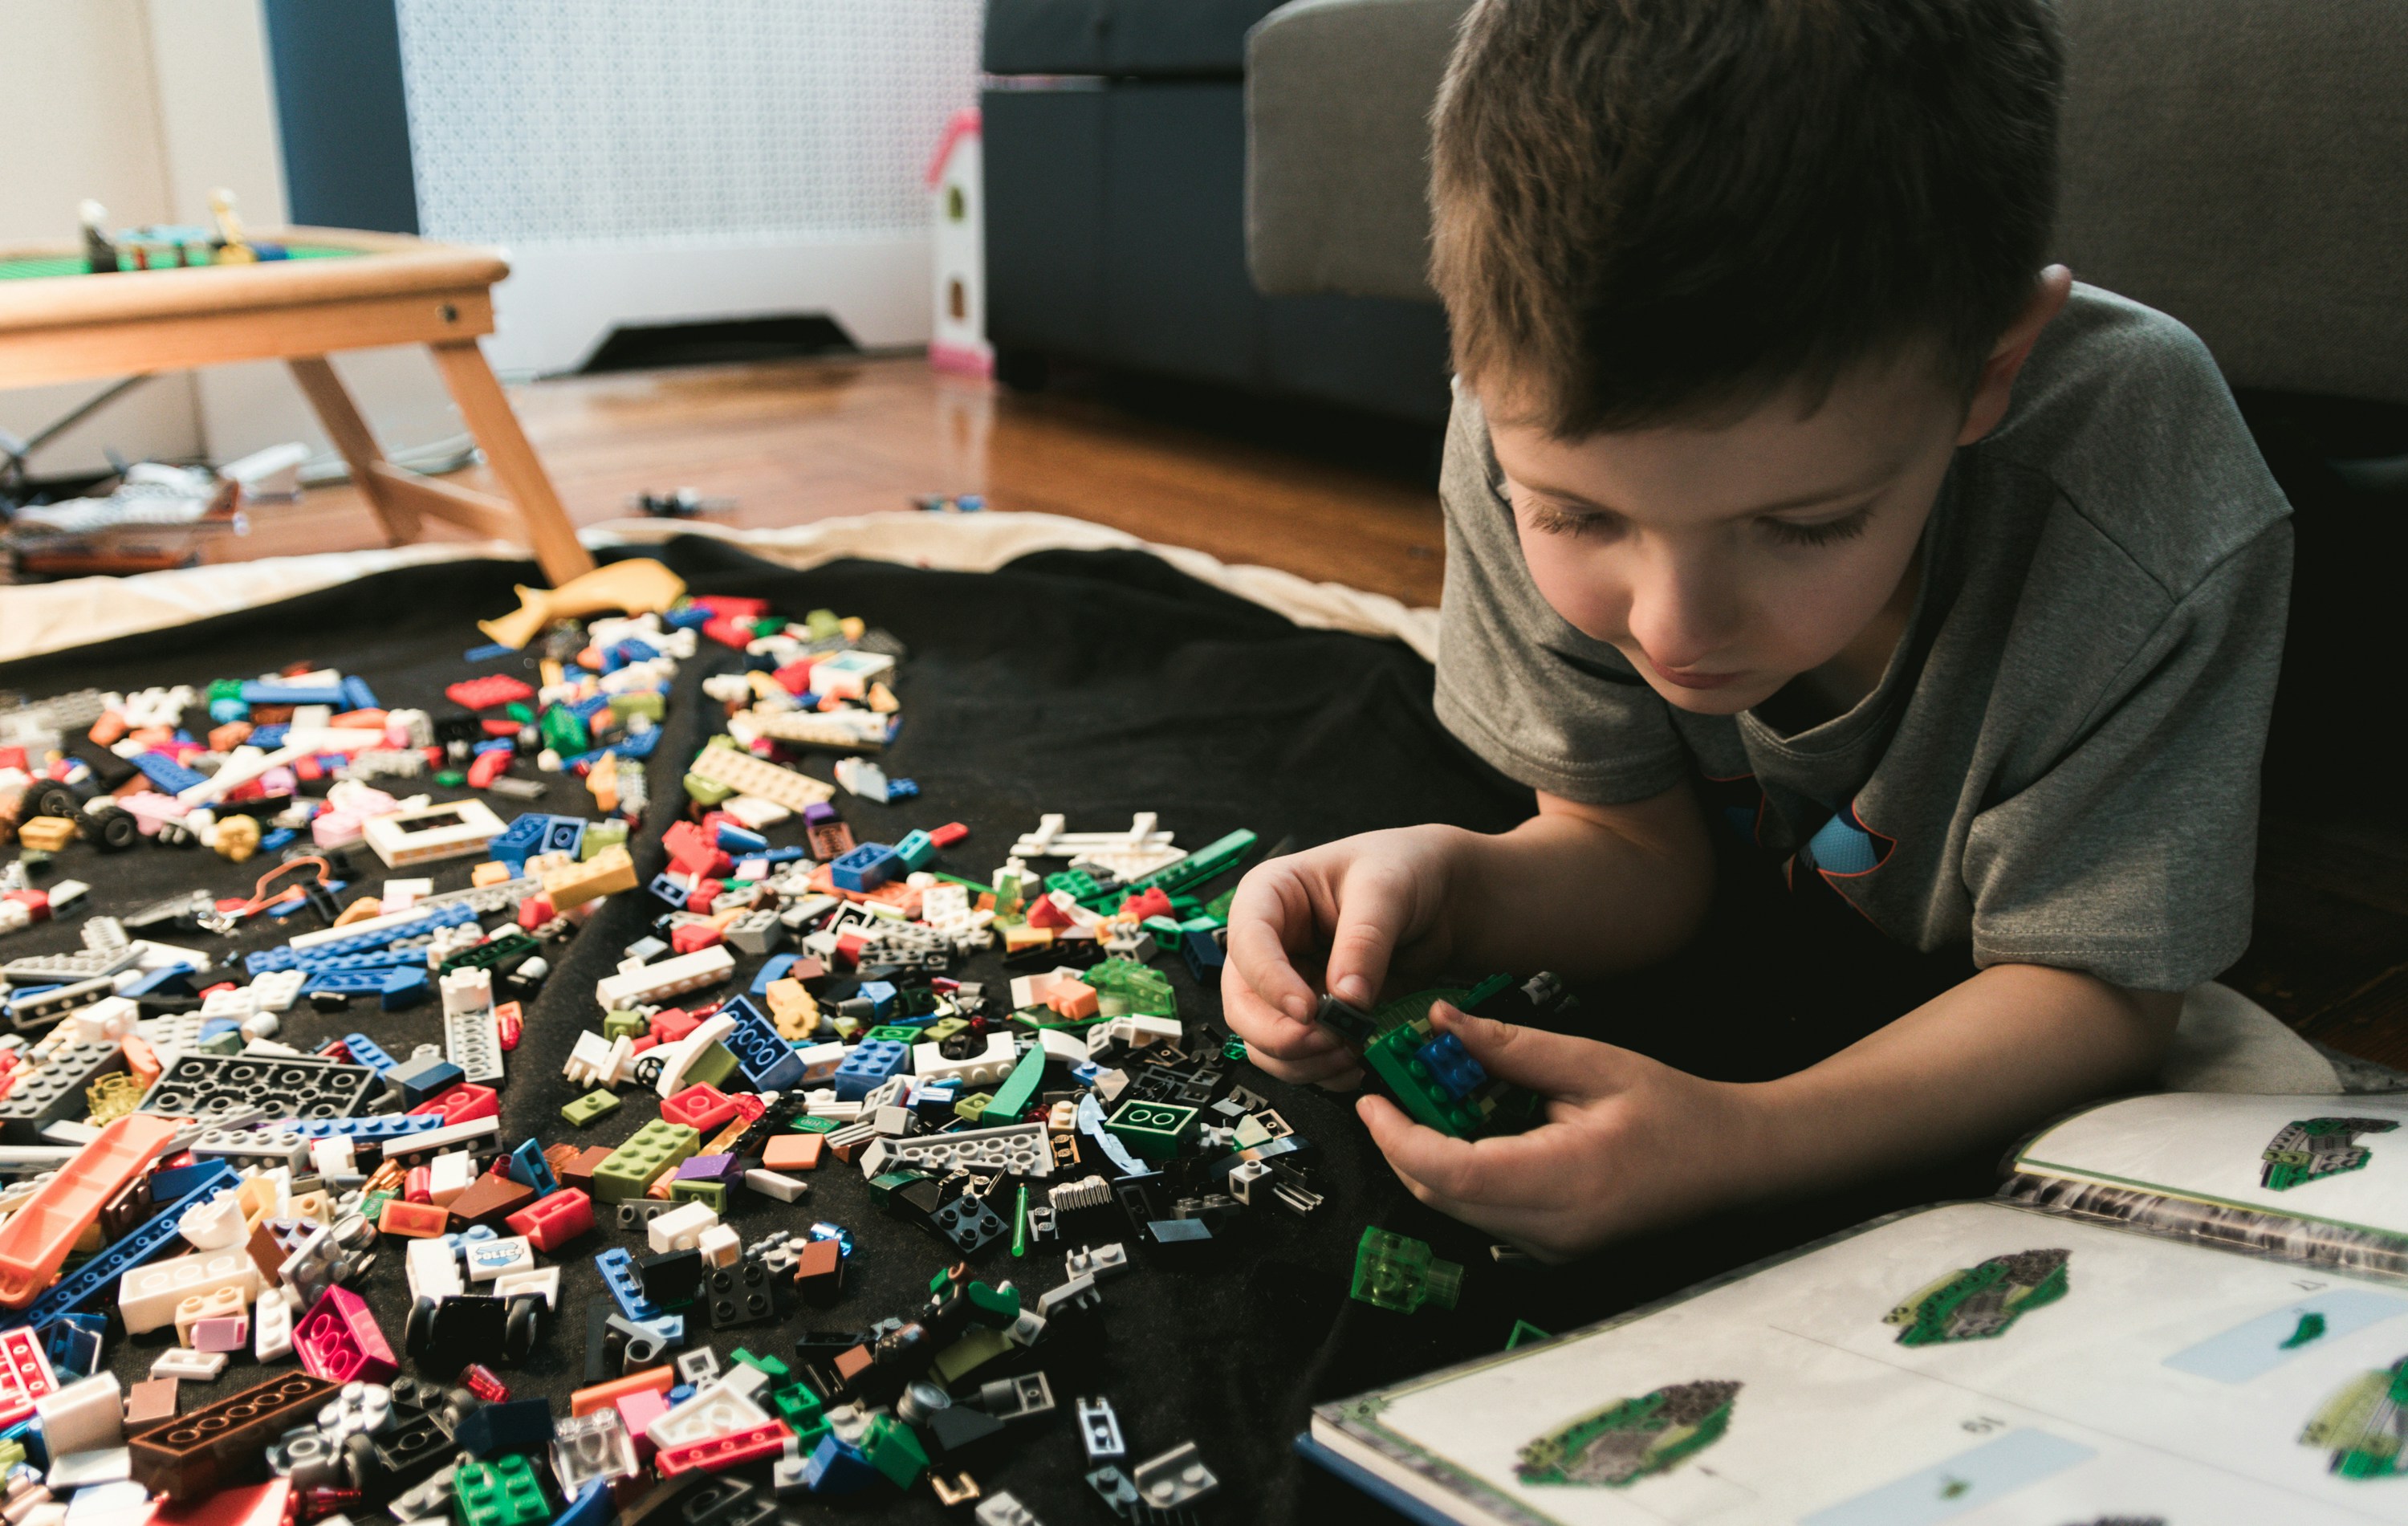 Raising Little Engineers: Nurturing STEM Learning and Constructive Play at Home